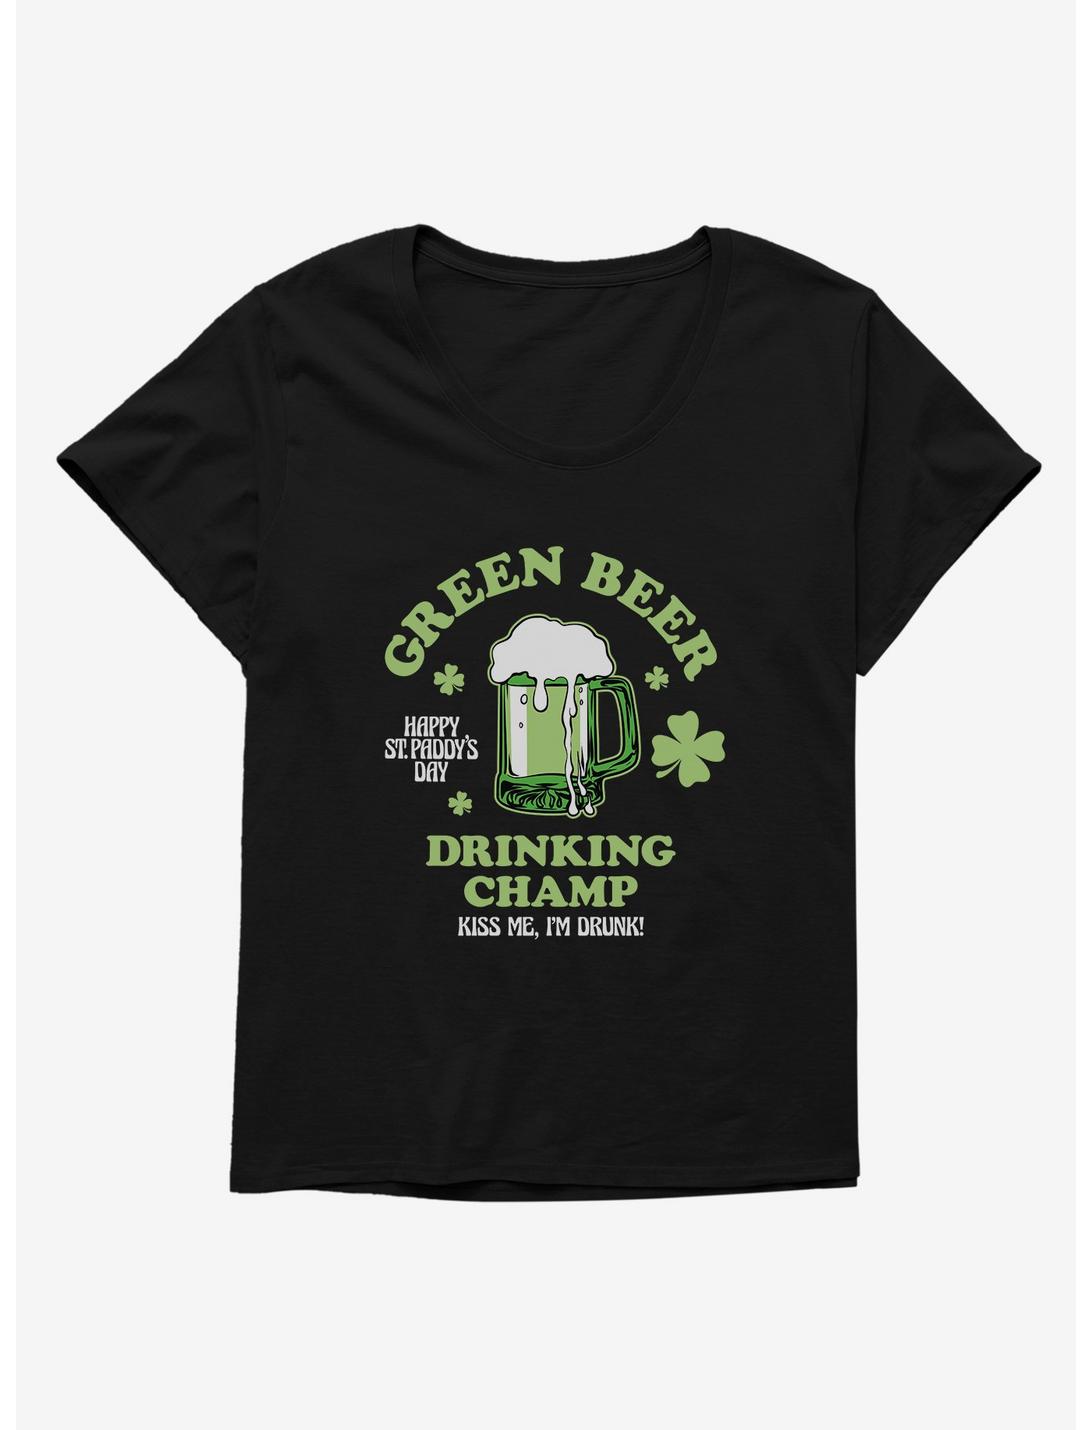 St. Patty's Green Beer Drinking Champ Womens T-Shirt Plus Size, , hi-res